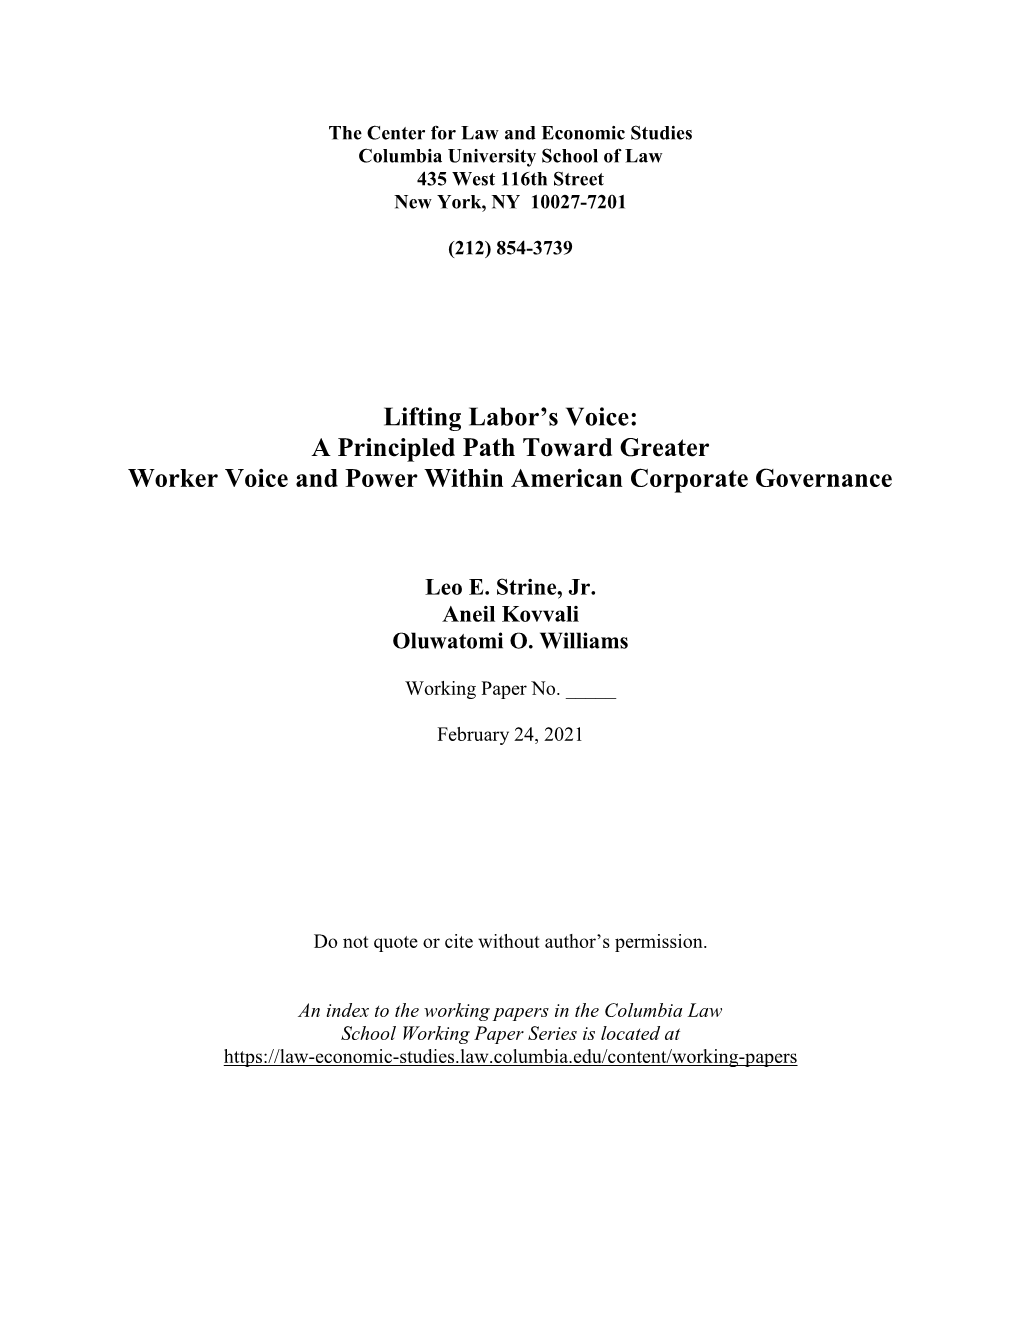 Lifting Labor's Voice: a Principled Path Toward Greater Worker Voice